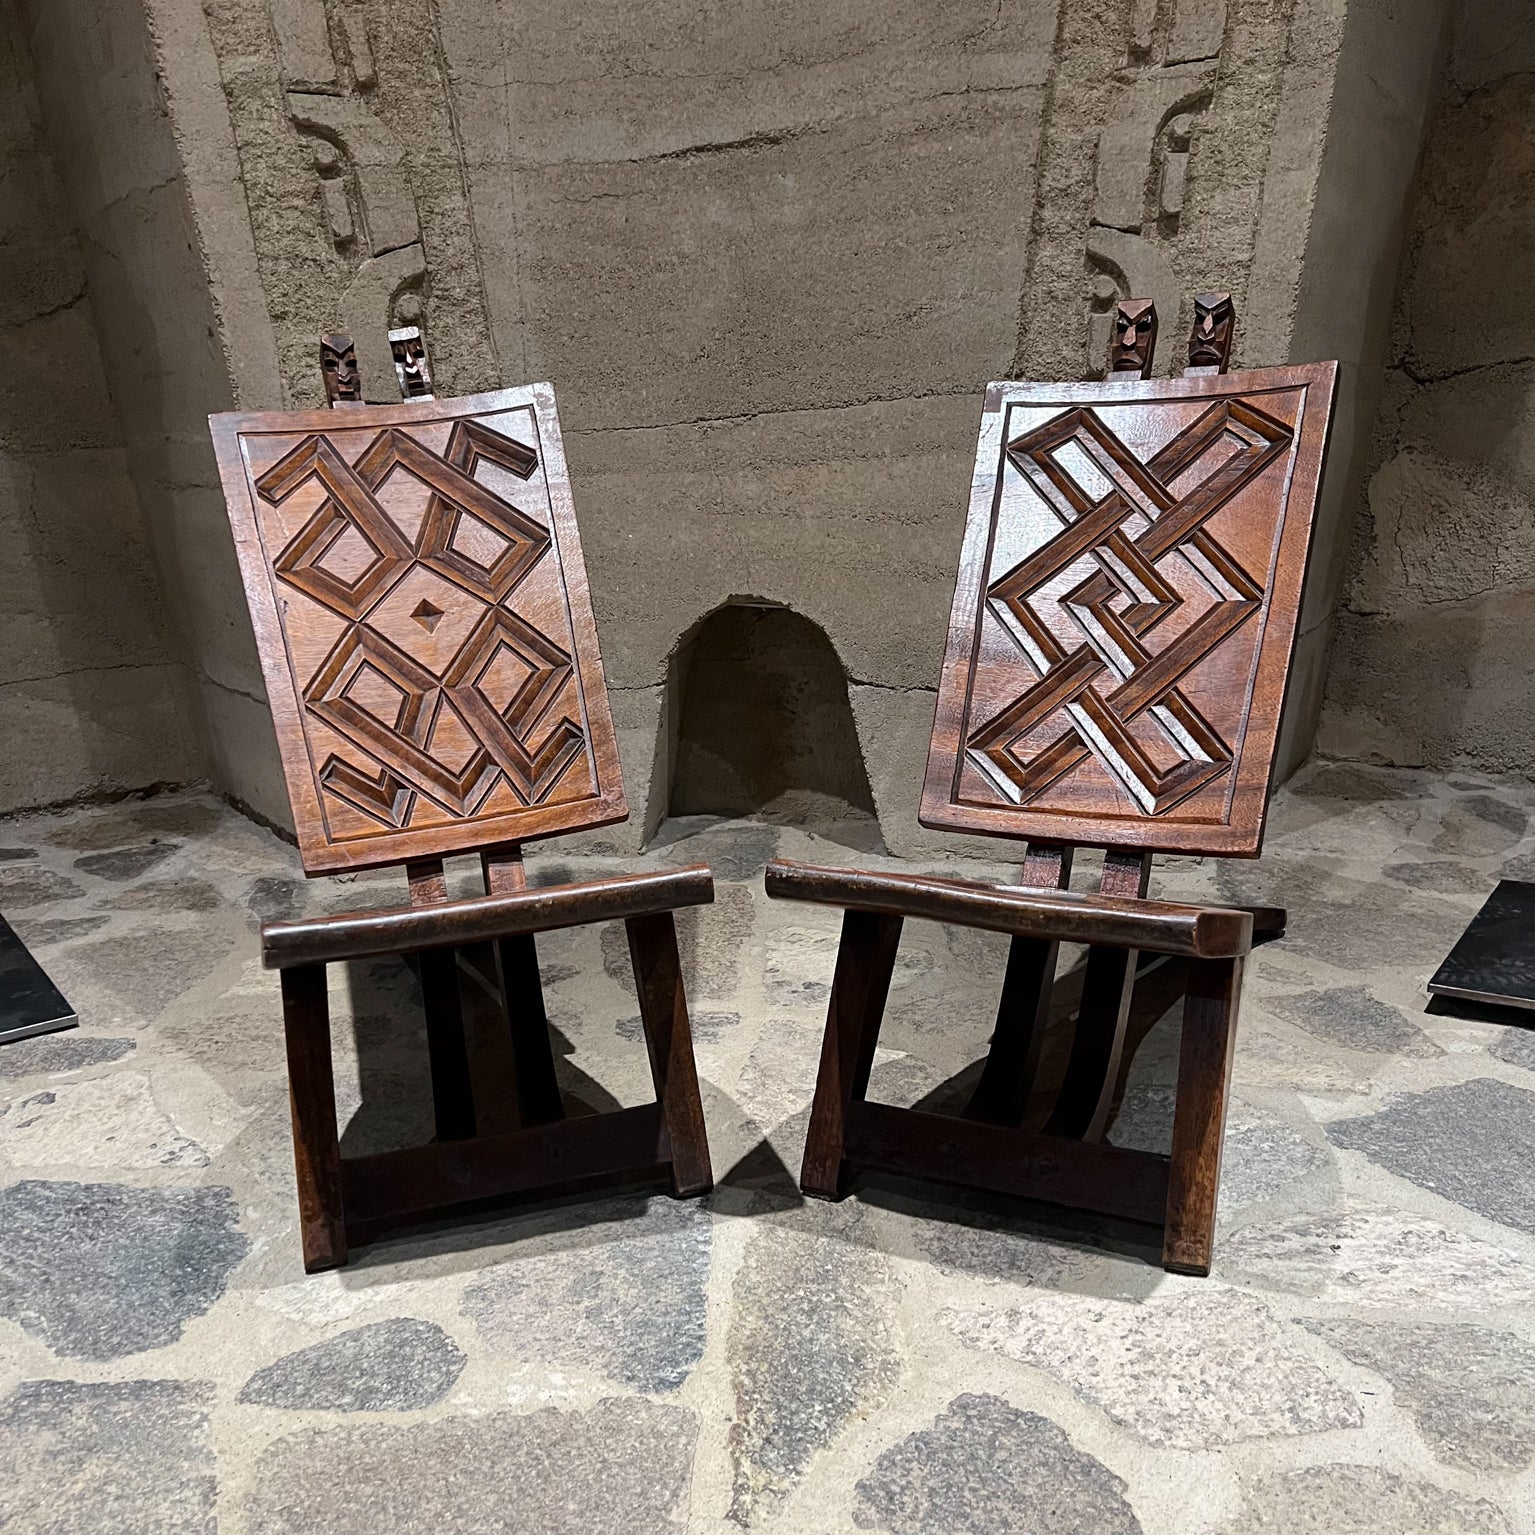 
1960s High Quality Pair of Sculptural Form African Chief Ceremonial Folding Chairs Geometric Carved Back Rest
29 tall x 35 d x 13.75 w Seat 12.25 at tallest x 8.5 at lowest
Preowned unrestored vintage condition
See all images provided.
SF LA OC